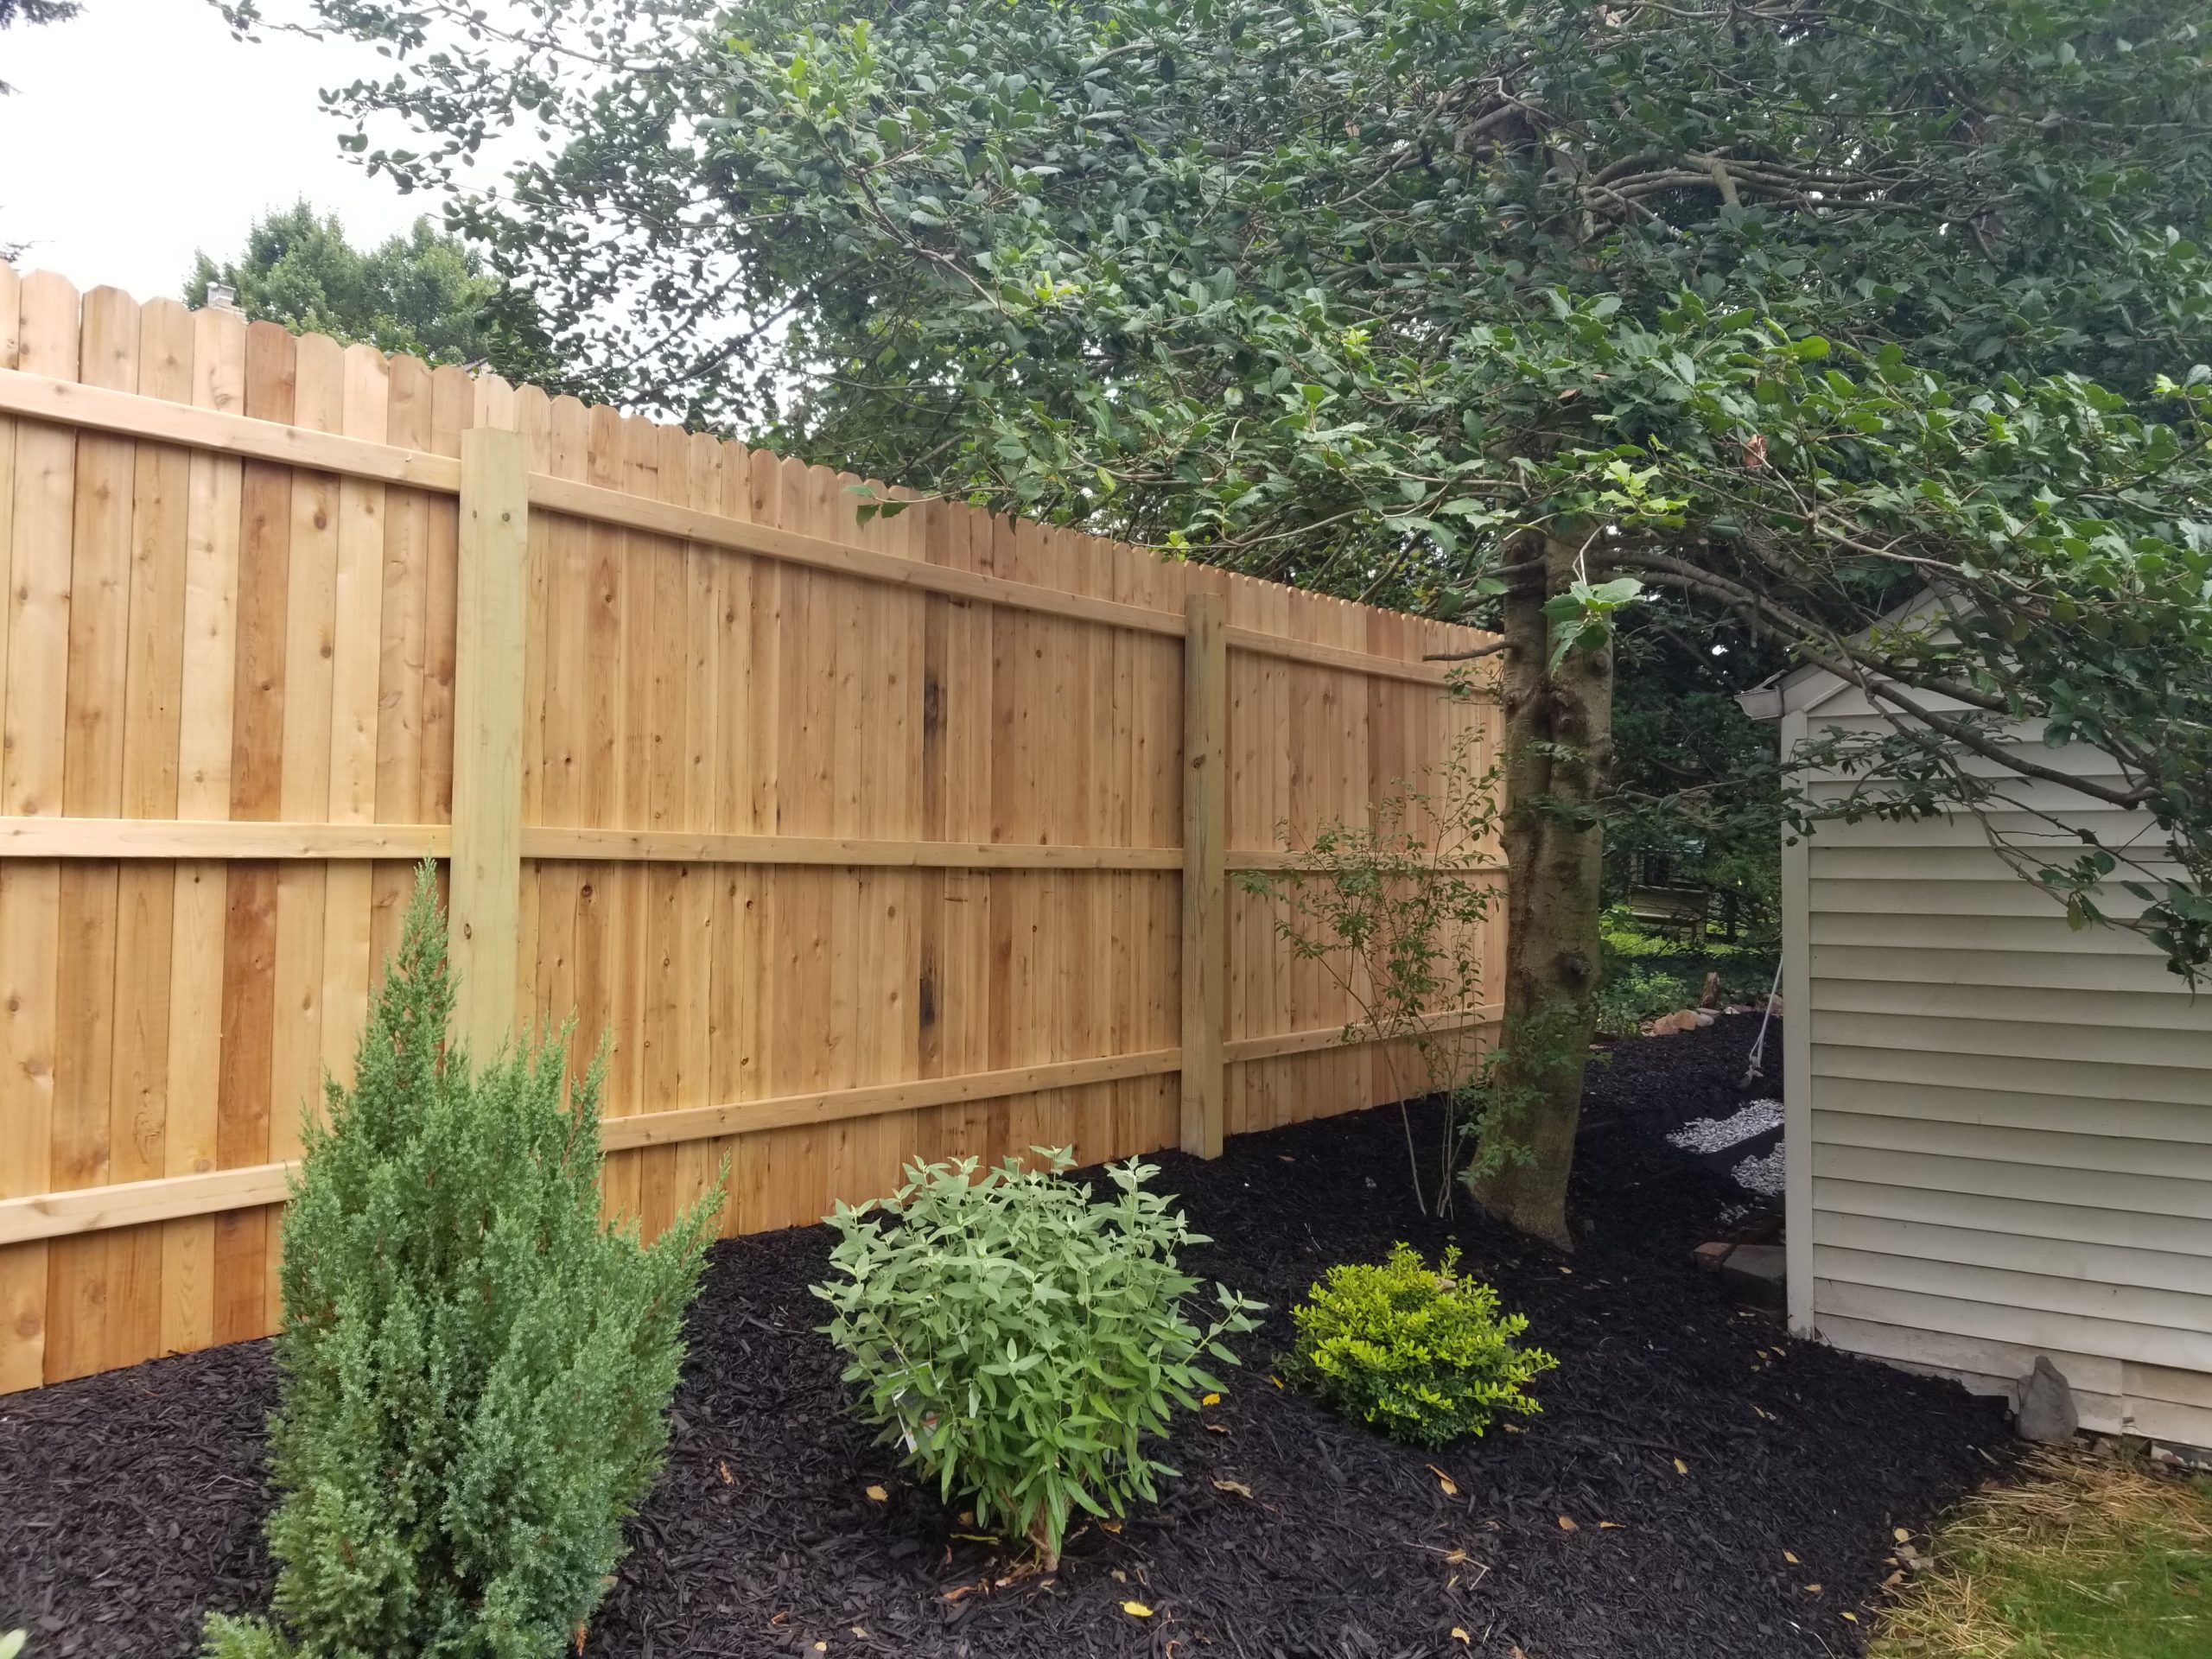 restored wooden fence surrounded by plants and trees in the backyard